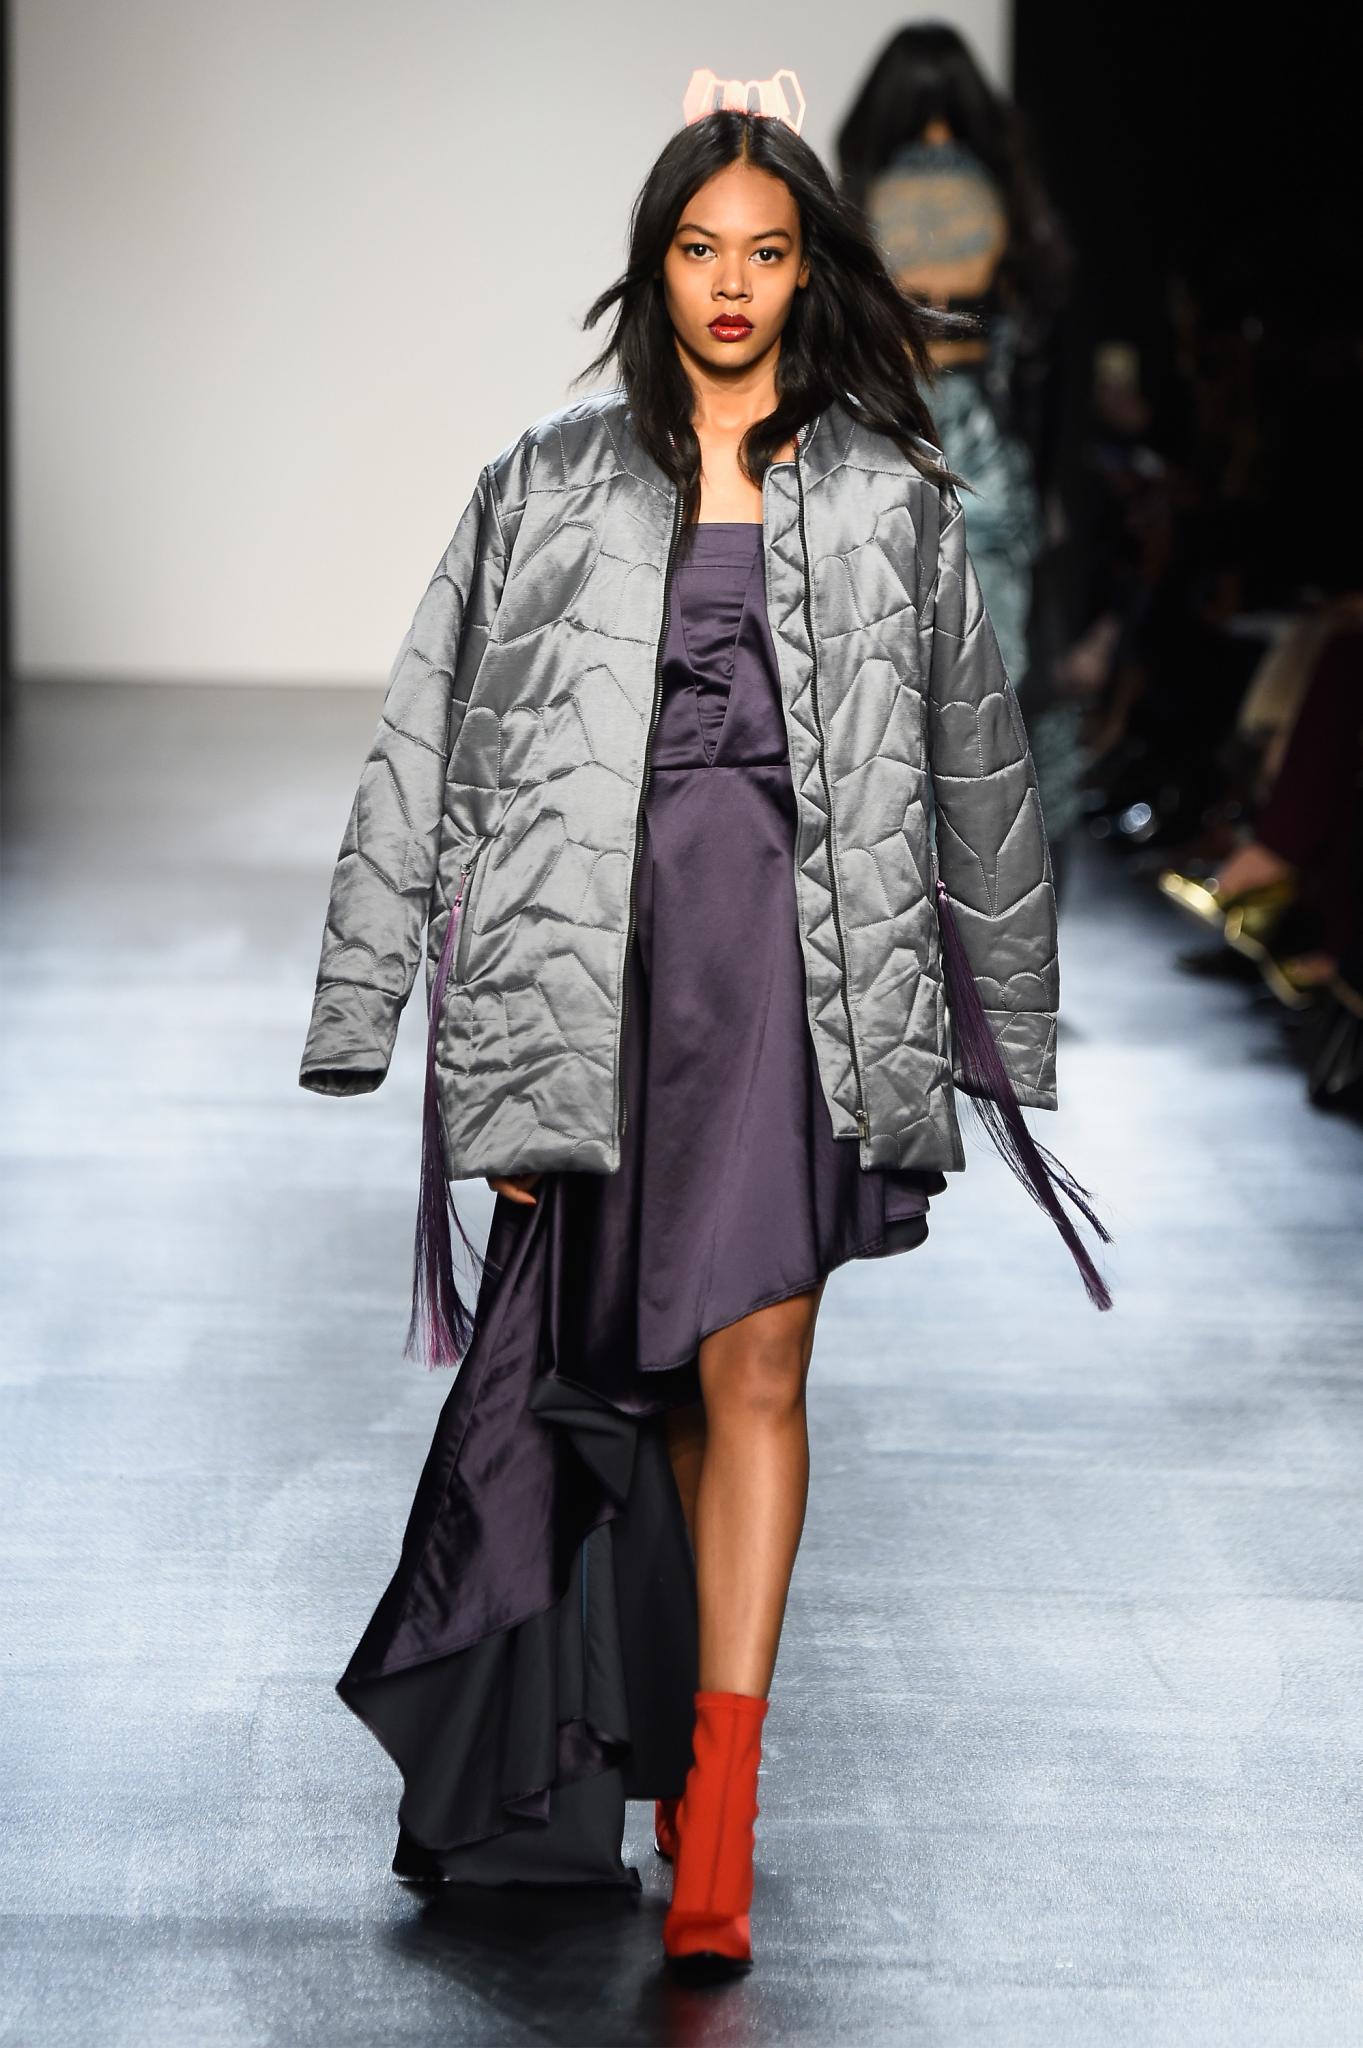 #TheySlay: See Every Black Model Gracing the Runways at NYFW So Far